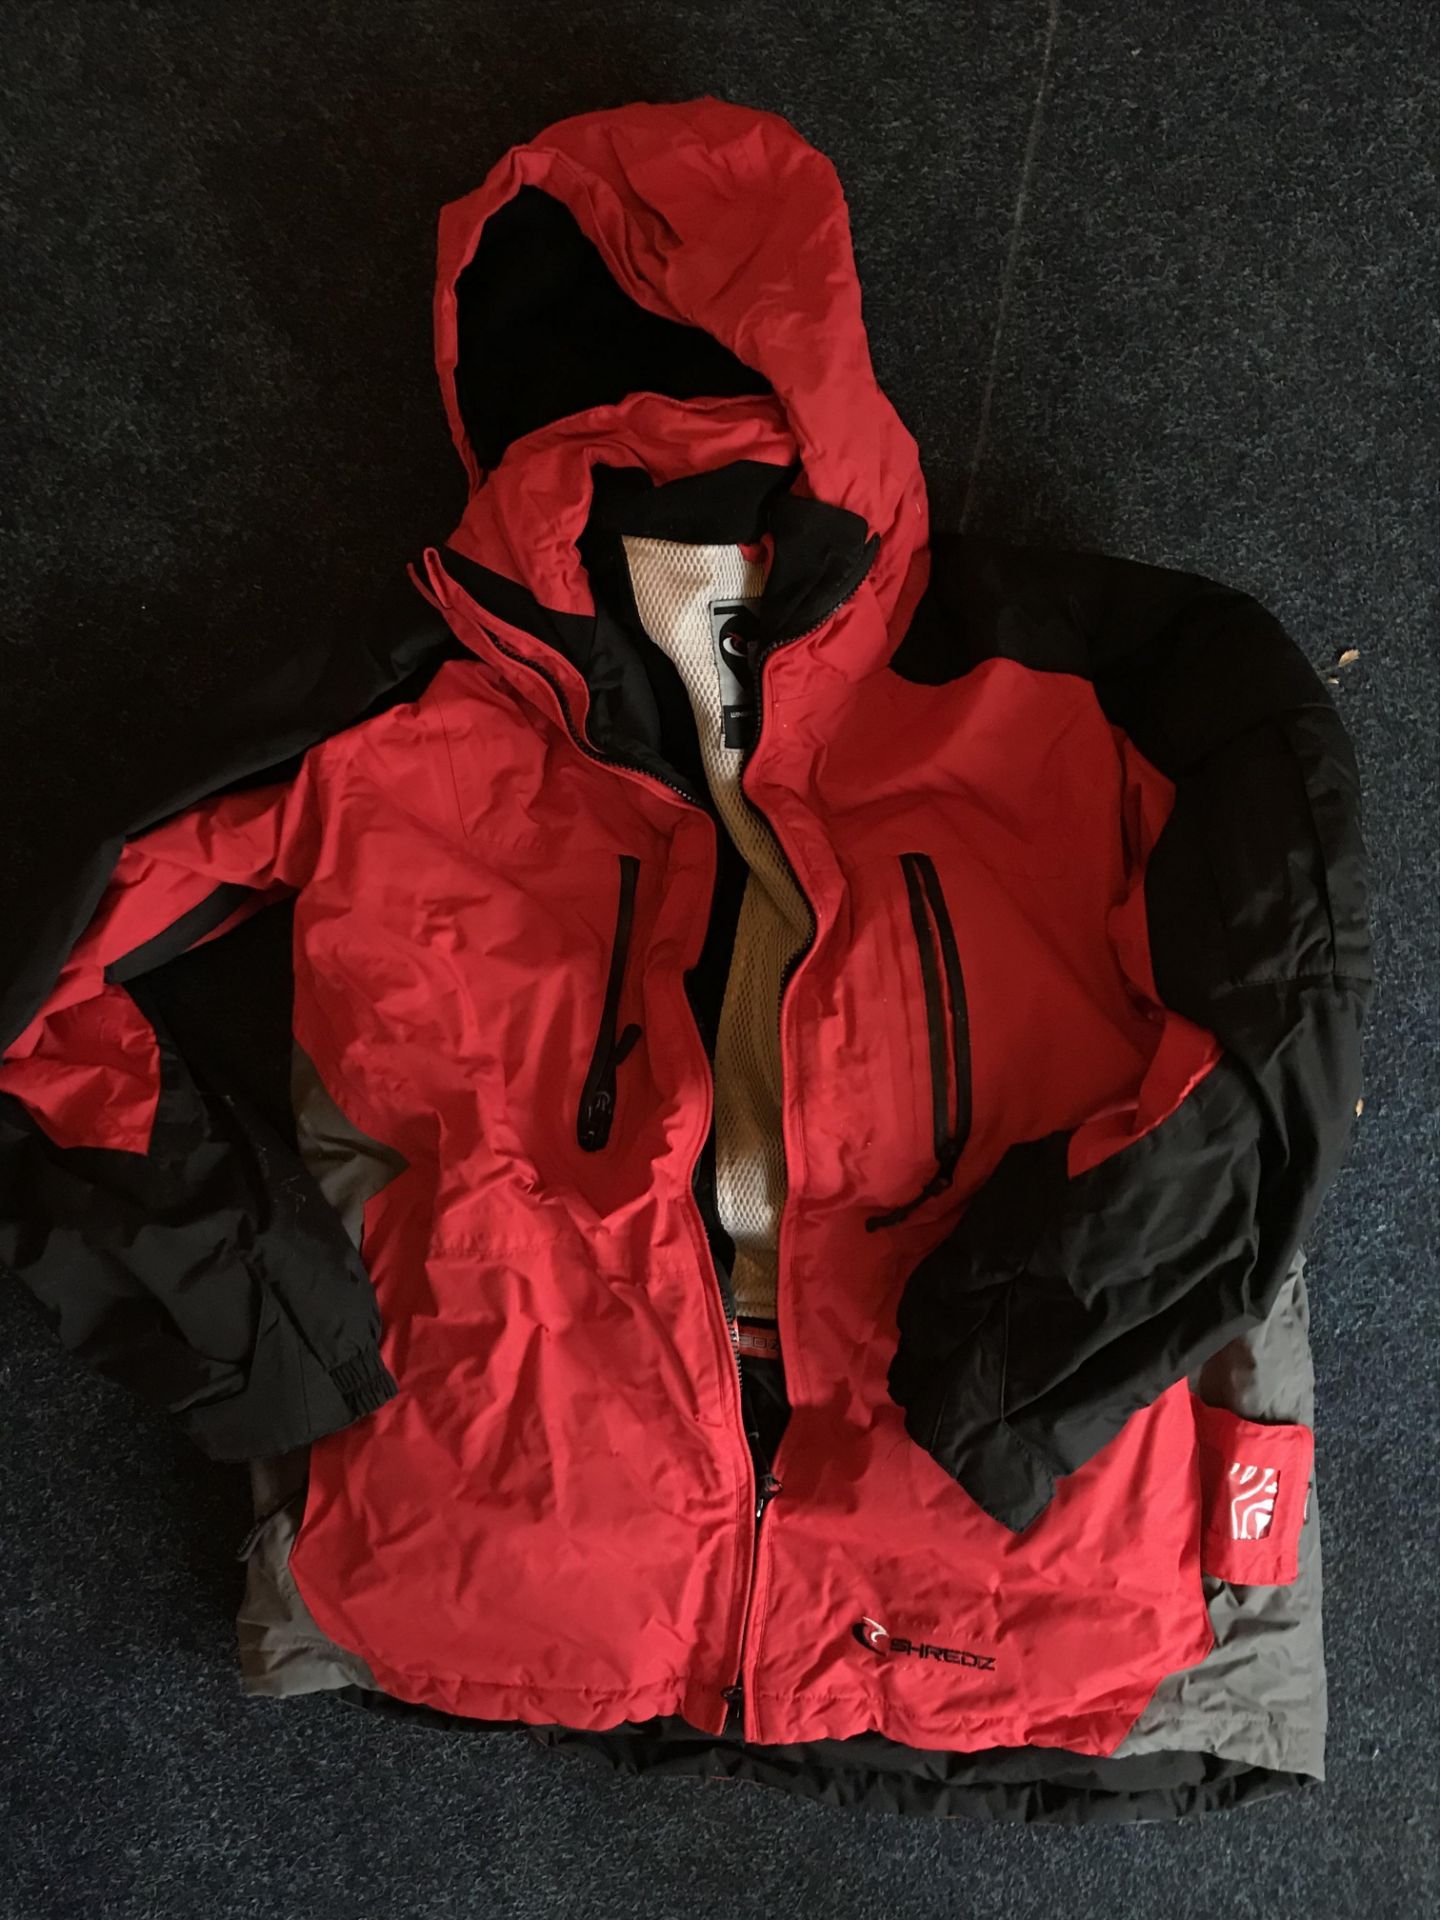 Mens Large Ski Jacket - Used only a handful of times